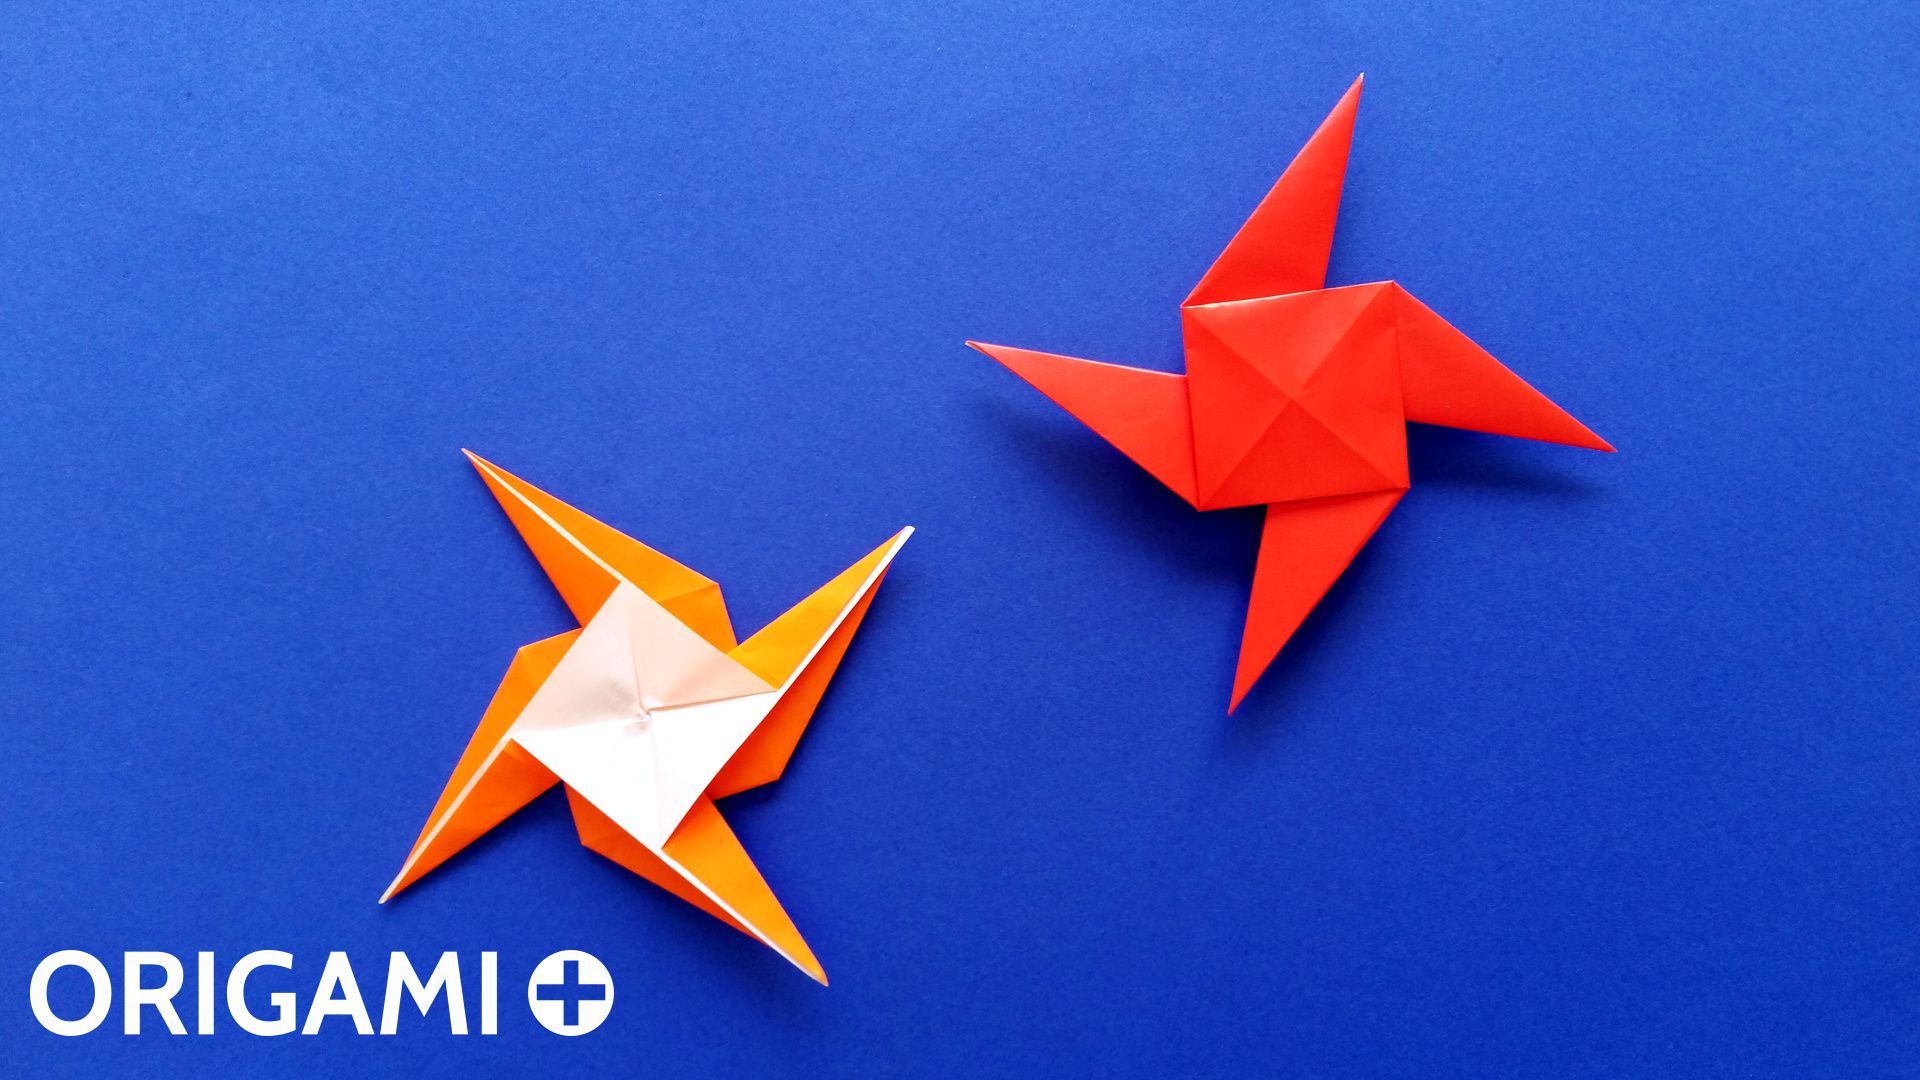 How to Make an Origami Ninja Star: Step-by-Step Tutorial